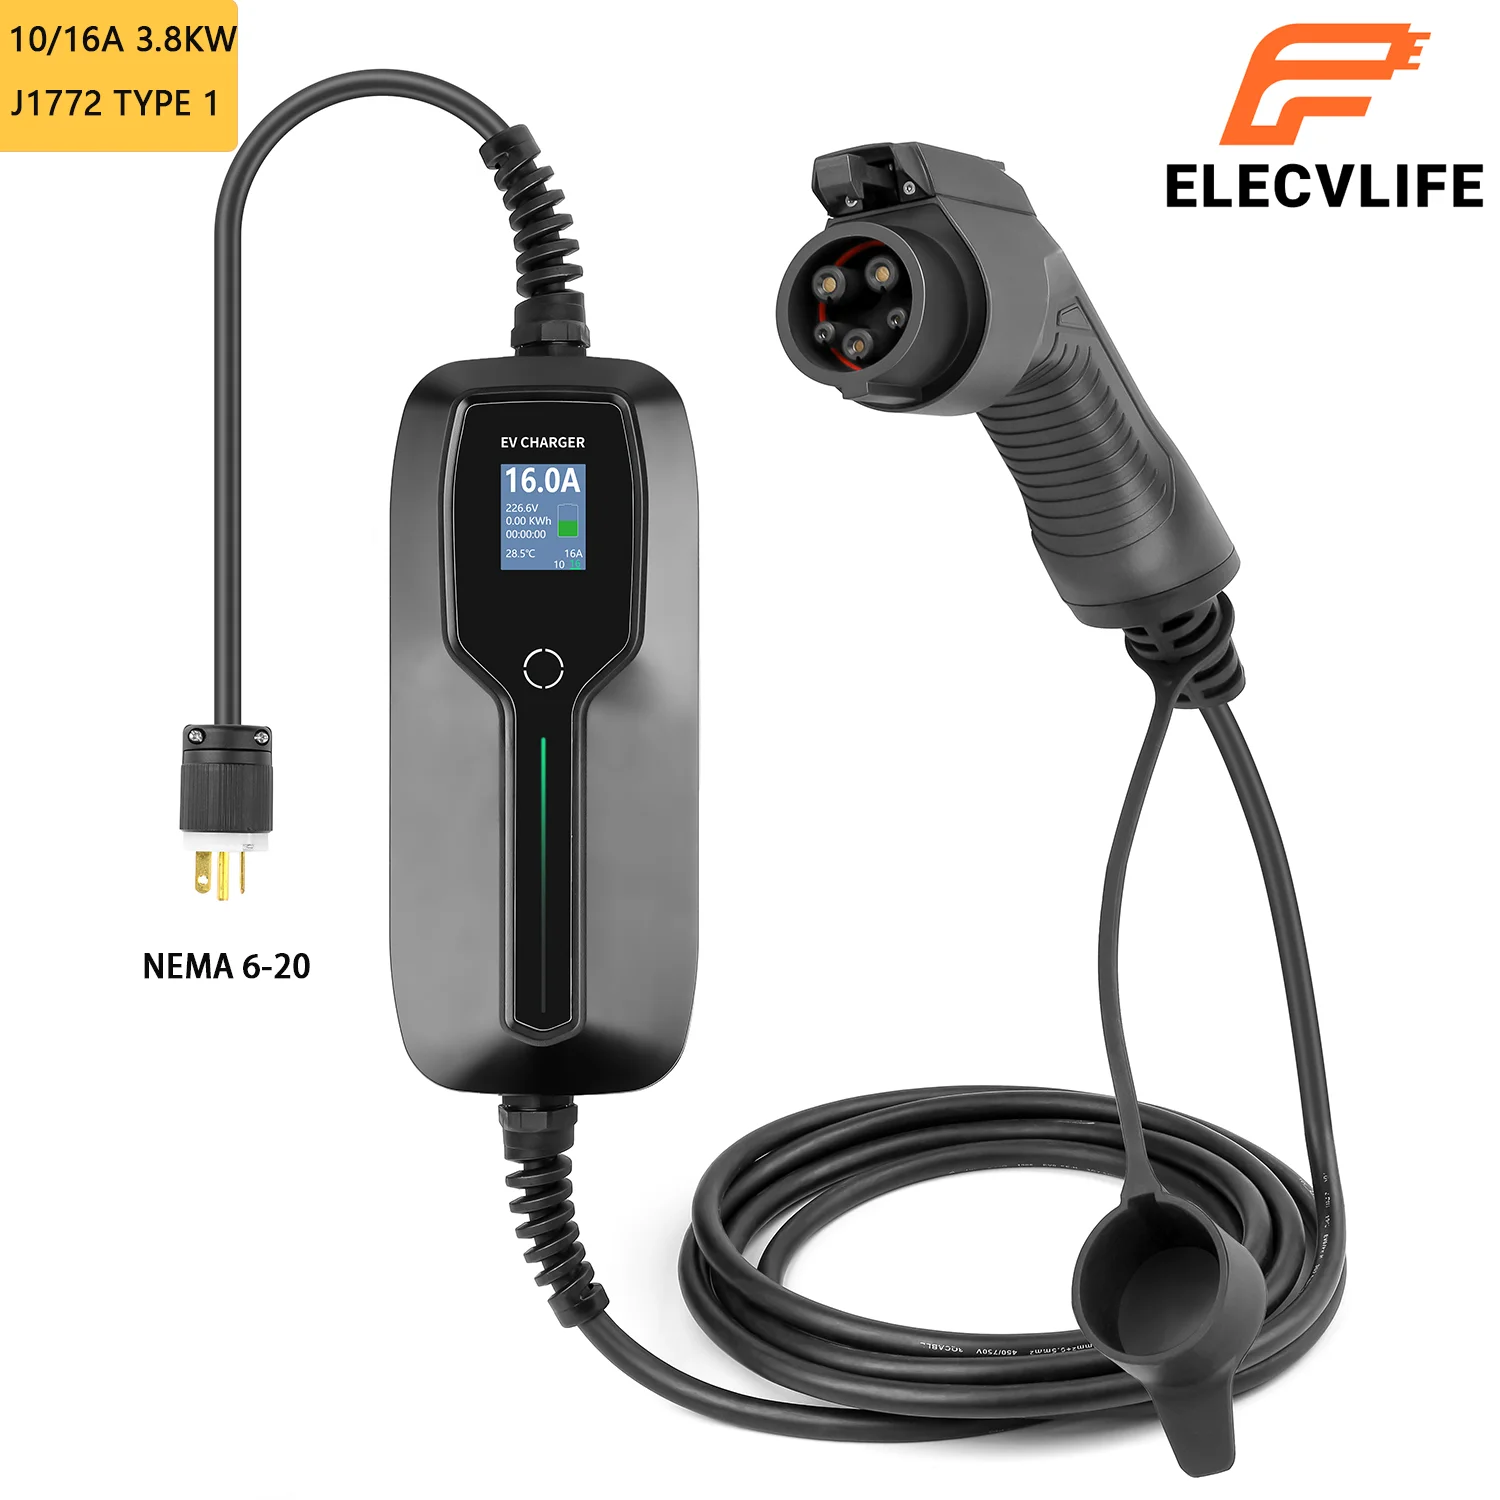 Elecvlife EV Charger Type 1 SAE J1772 Vehicle Charger Level 2 Portable Charger NEMA6-20 Plug 10/16A 3.6KW,100-240V, 25ft Cable